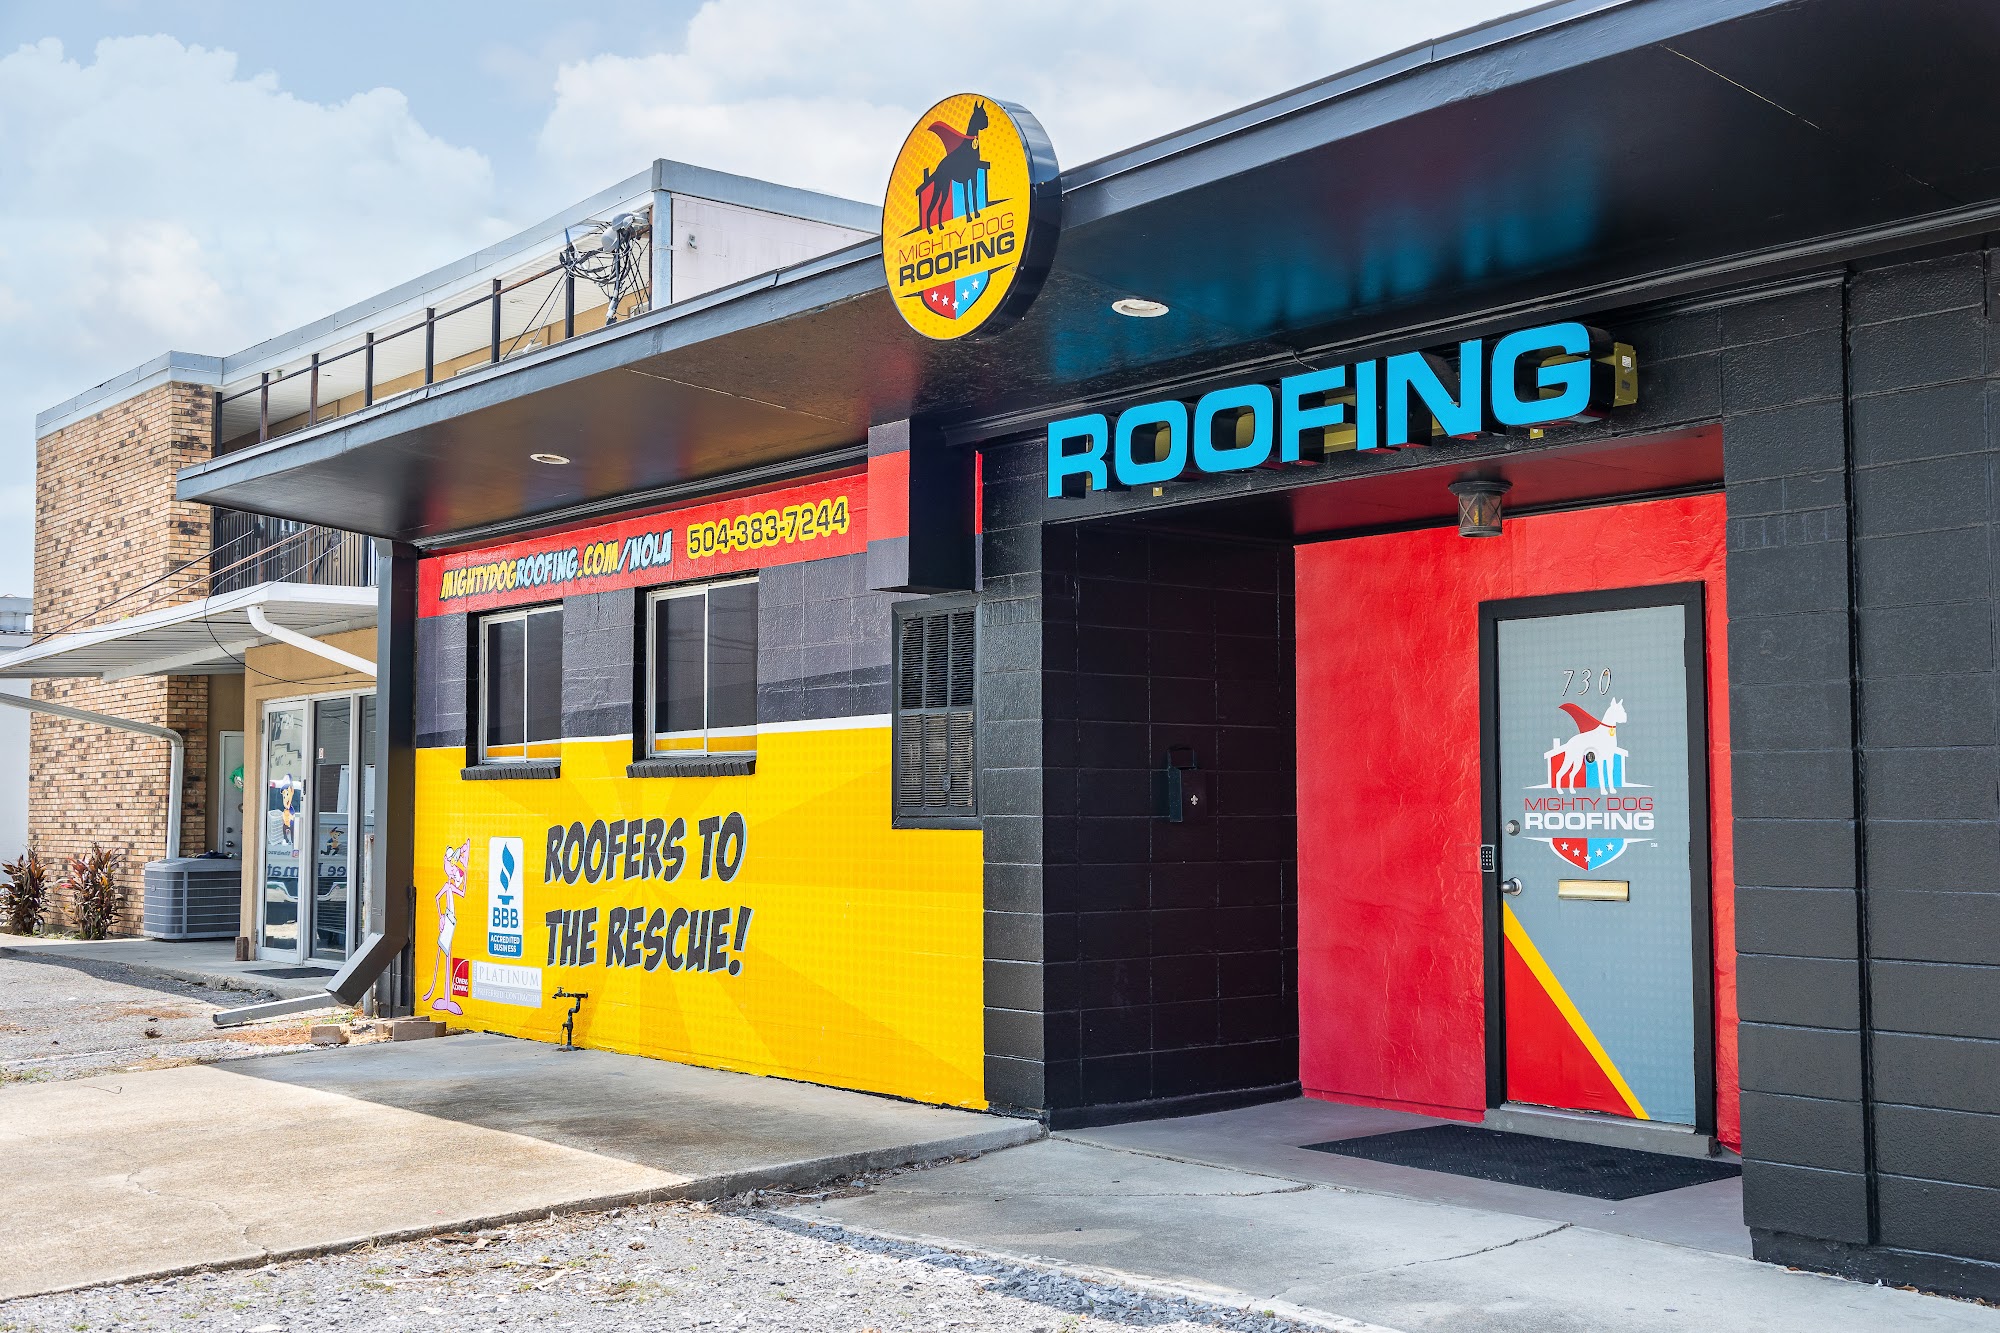 Mighty Dog Roofing of Greater New Orleans